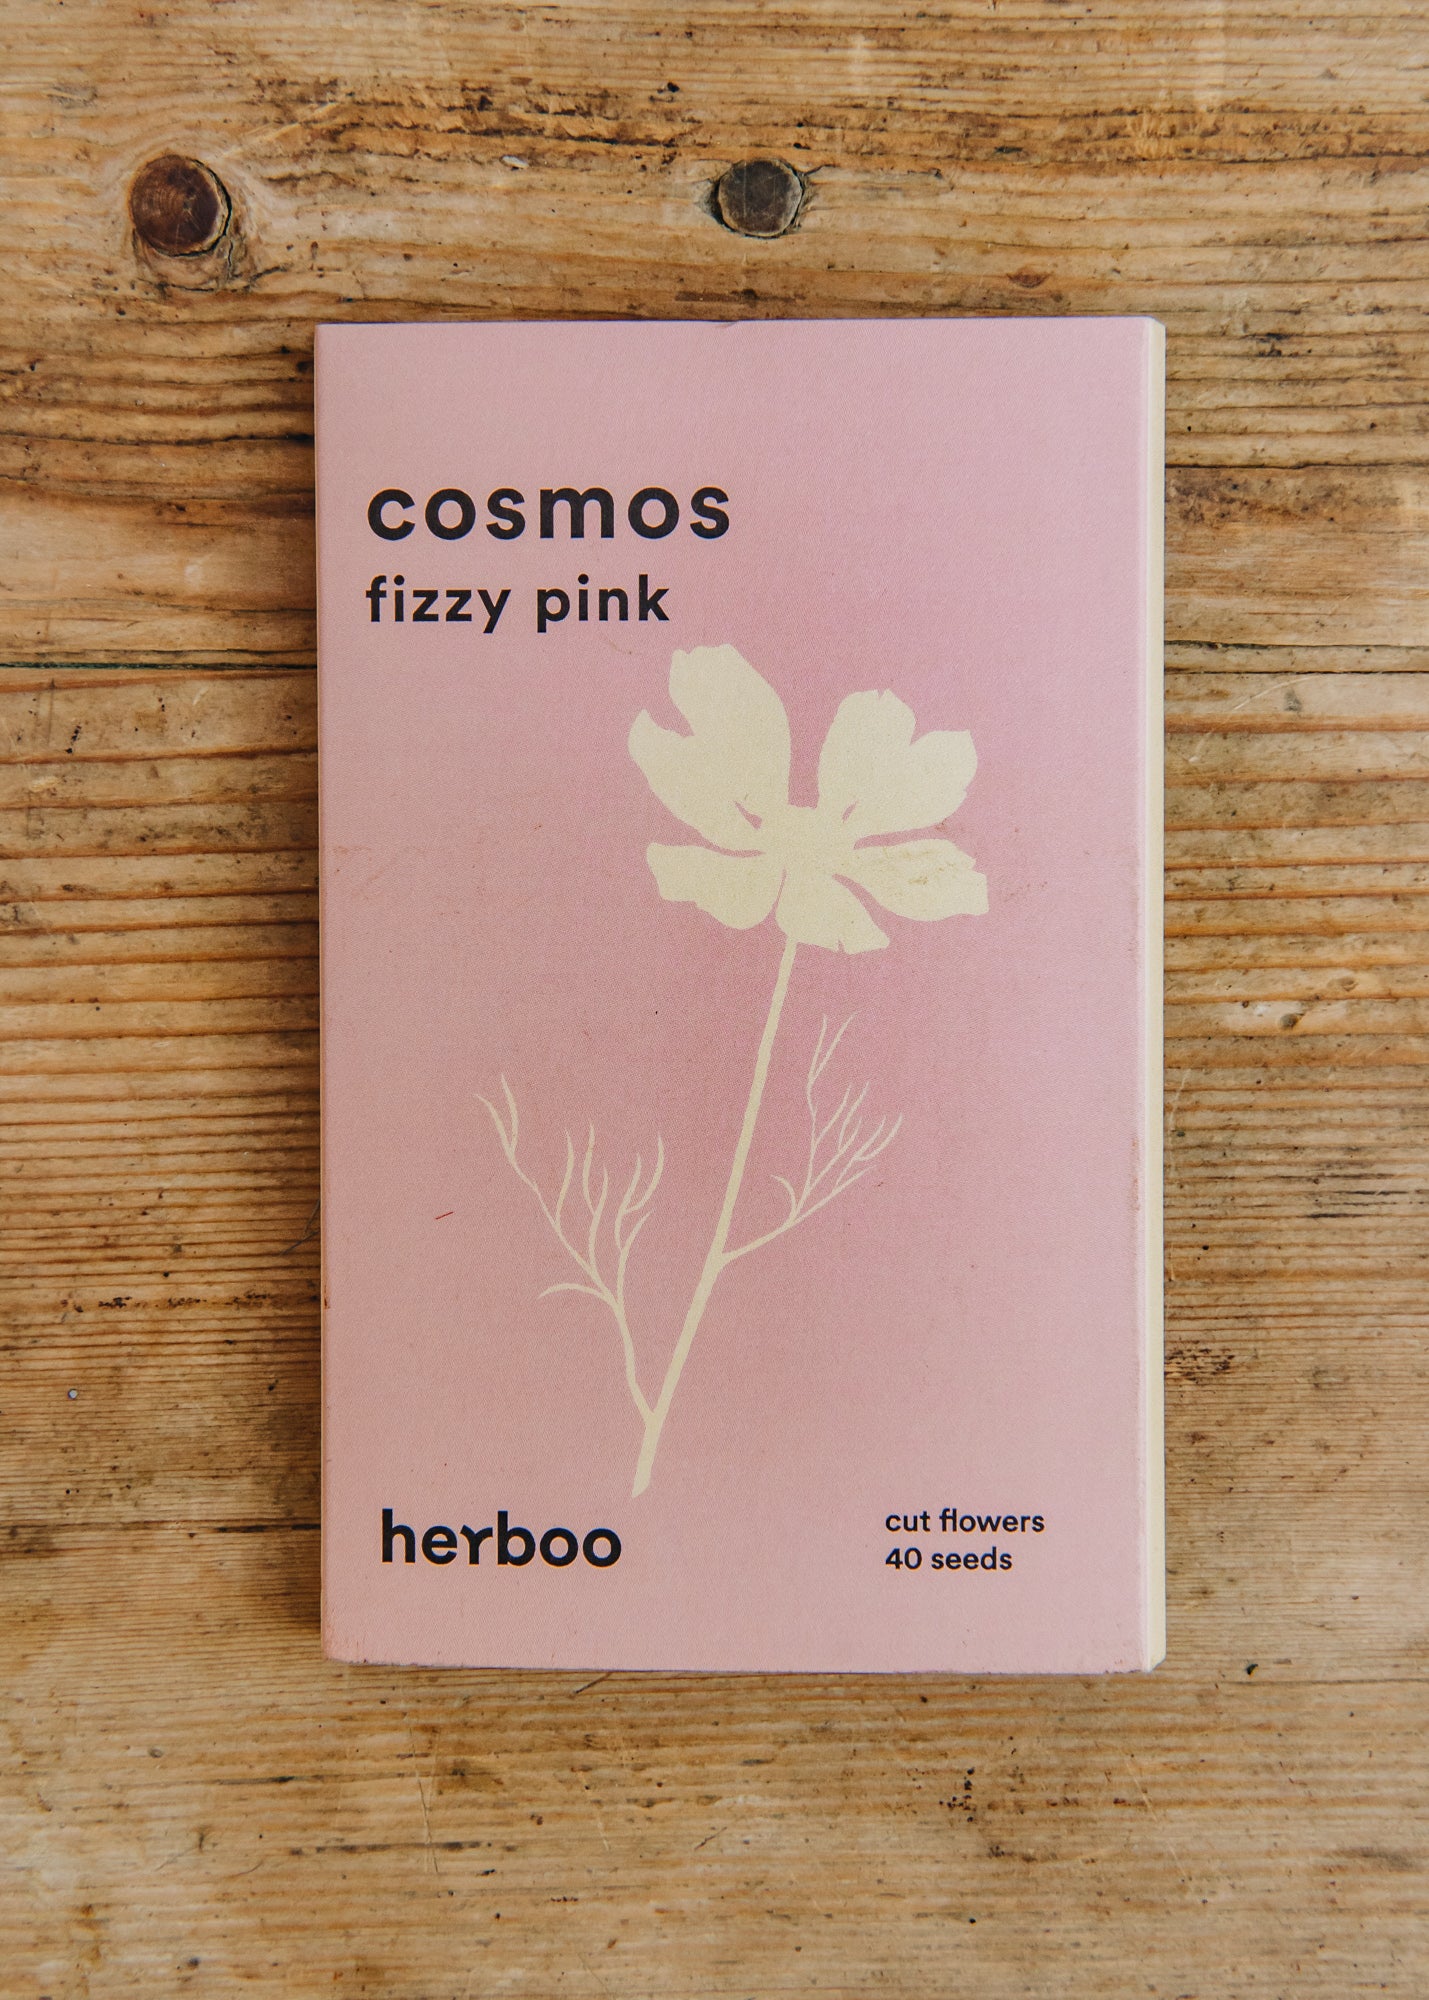 Cosmos Fizzy Pink Seeds